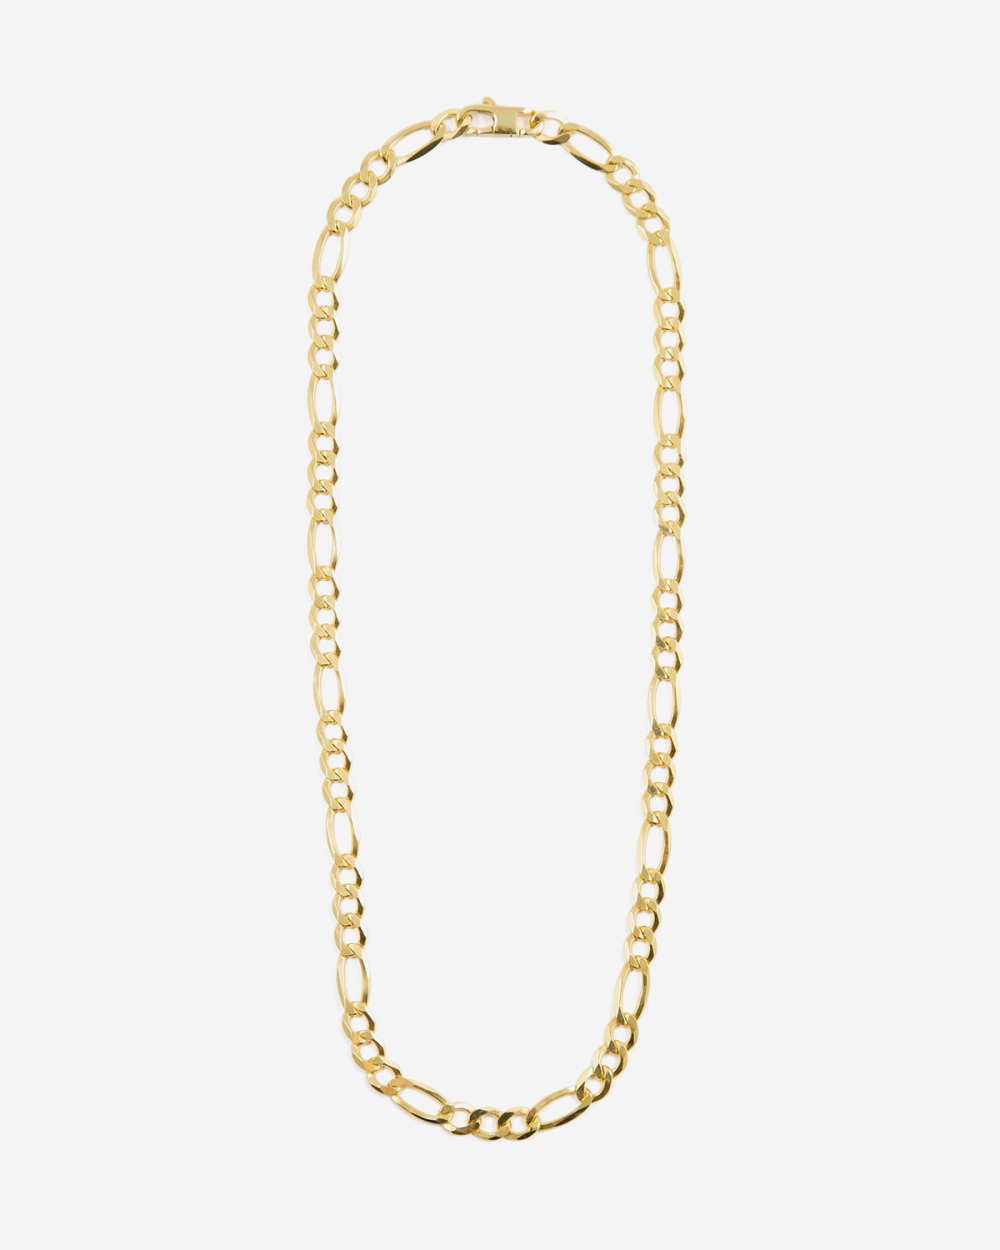 YELLOW GOLD 3+1 WIDE CURB LINK NECKLACE